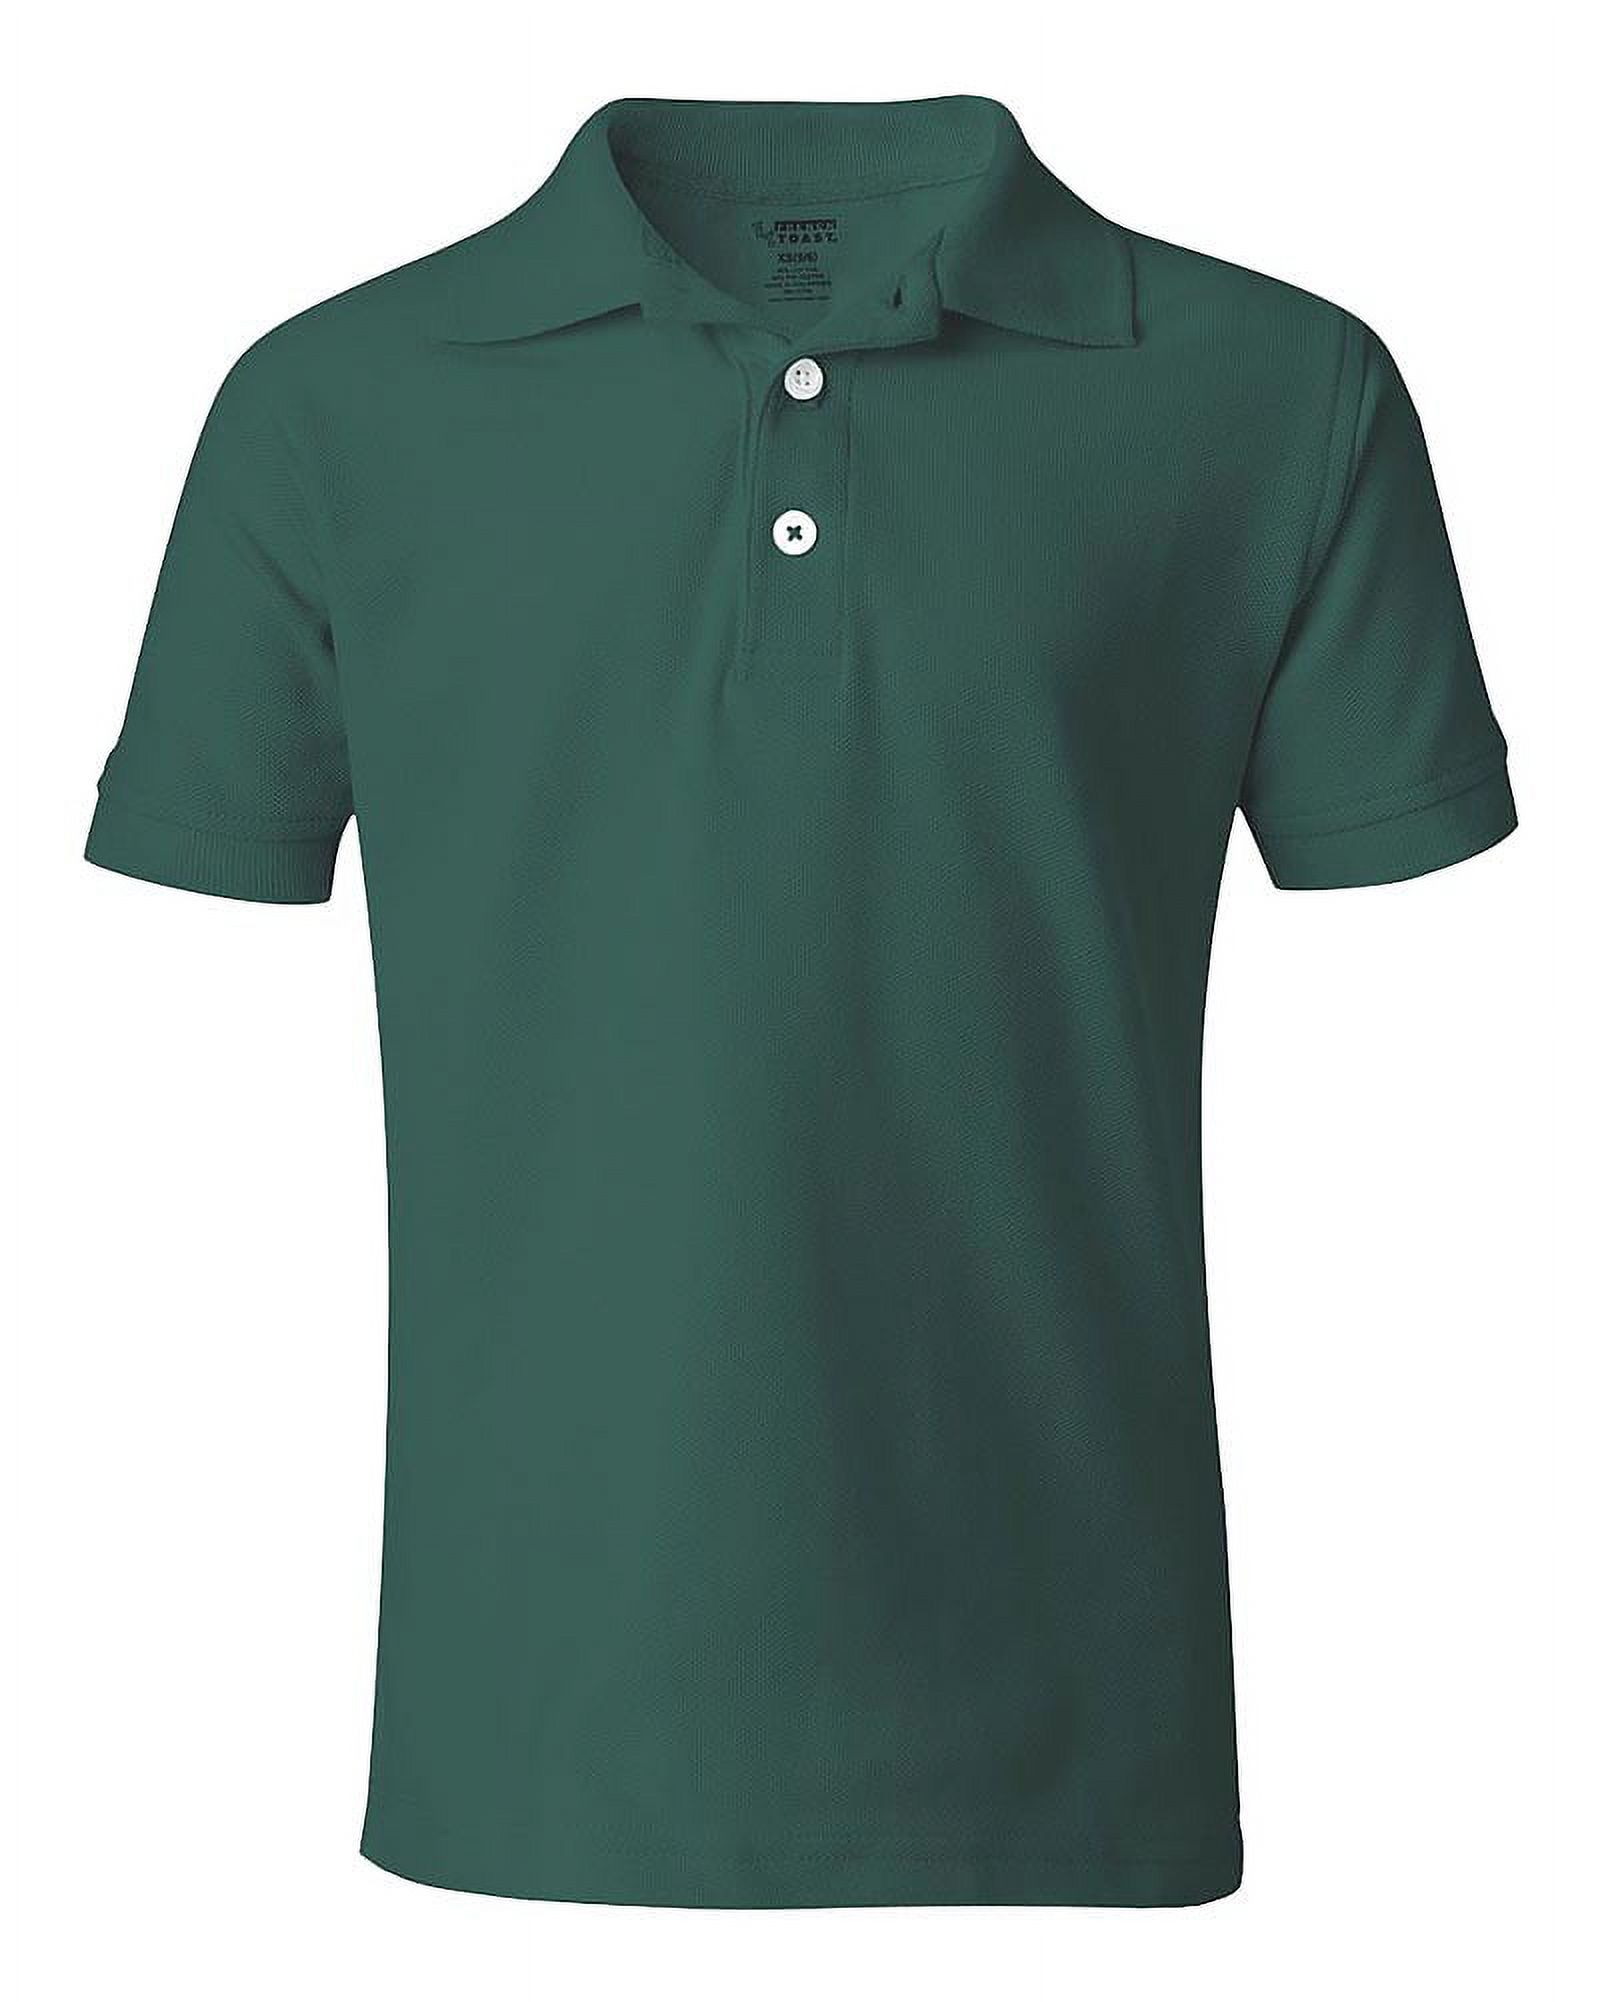 French Toast Boys Short Sleeve Pique Polo - image 2 of 2